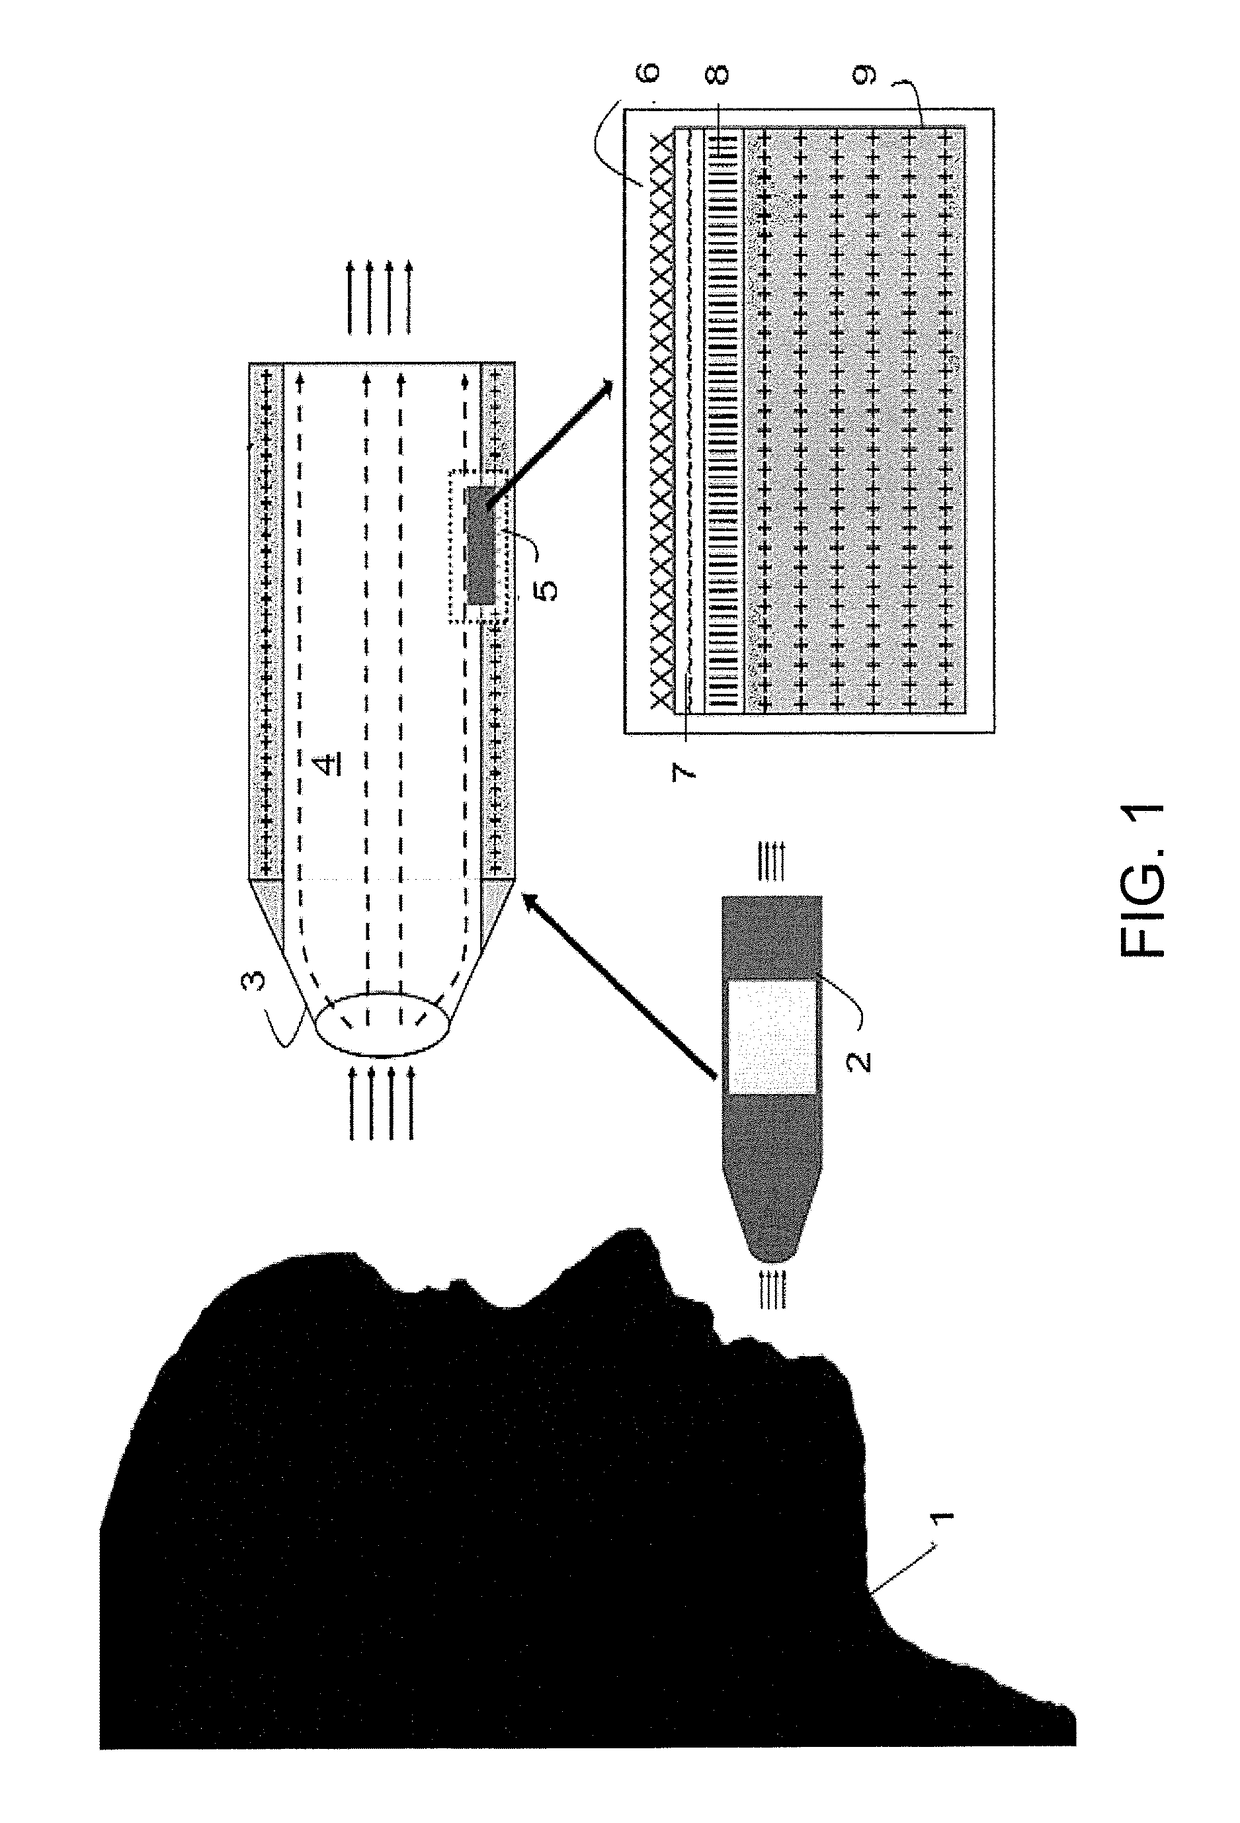 Breath analysis system, device and method employing nanoparticle-based sensor